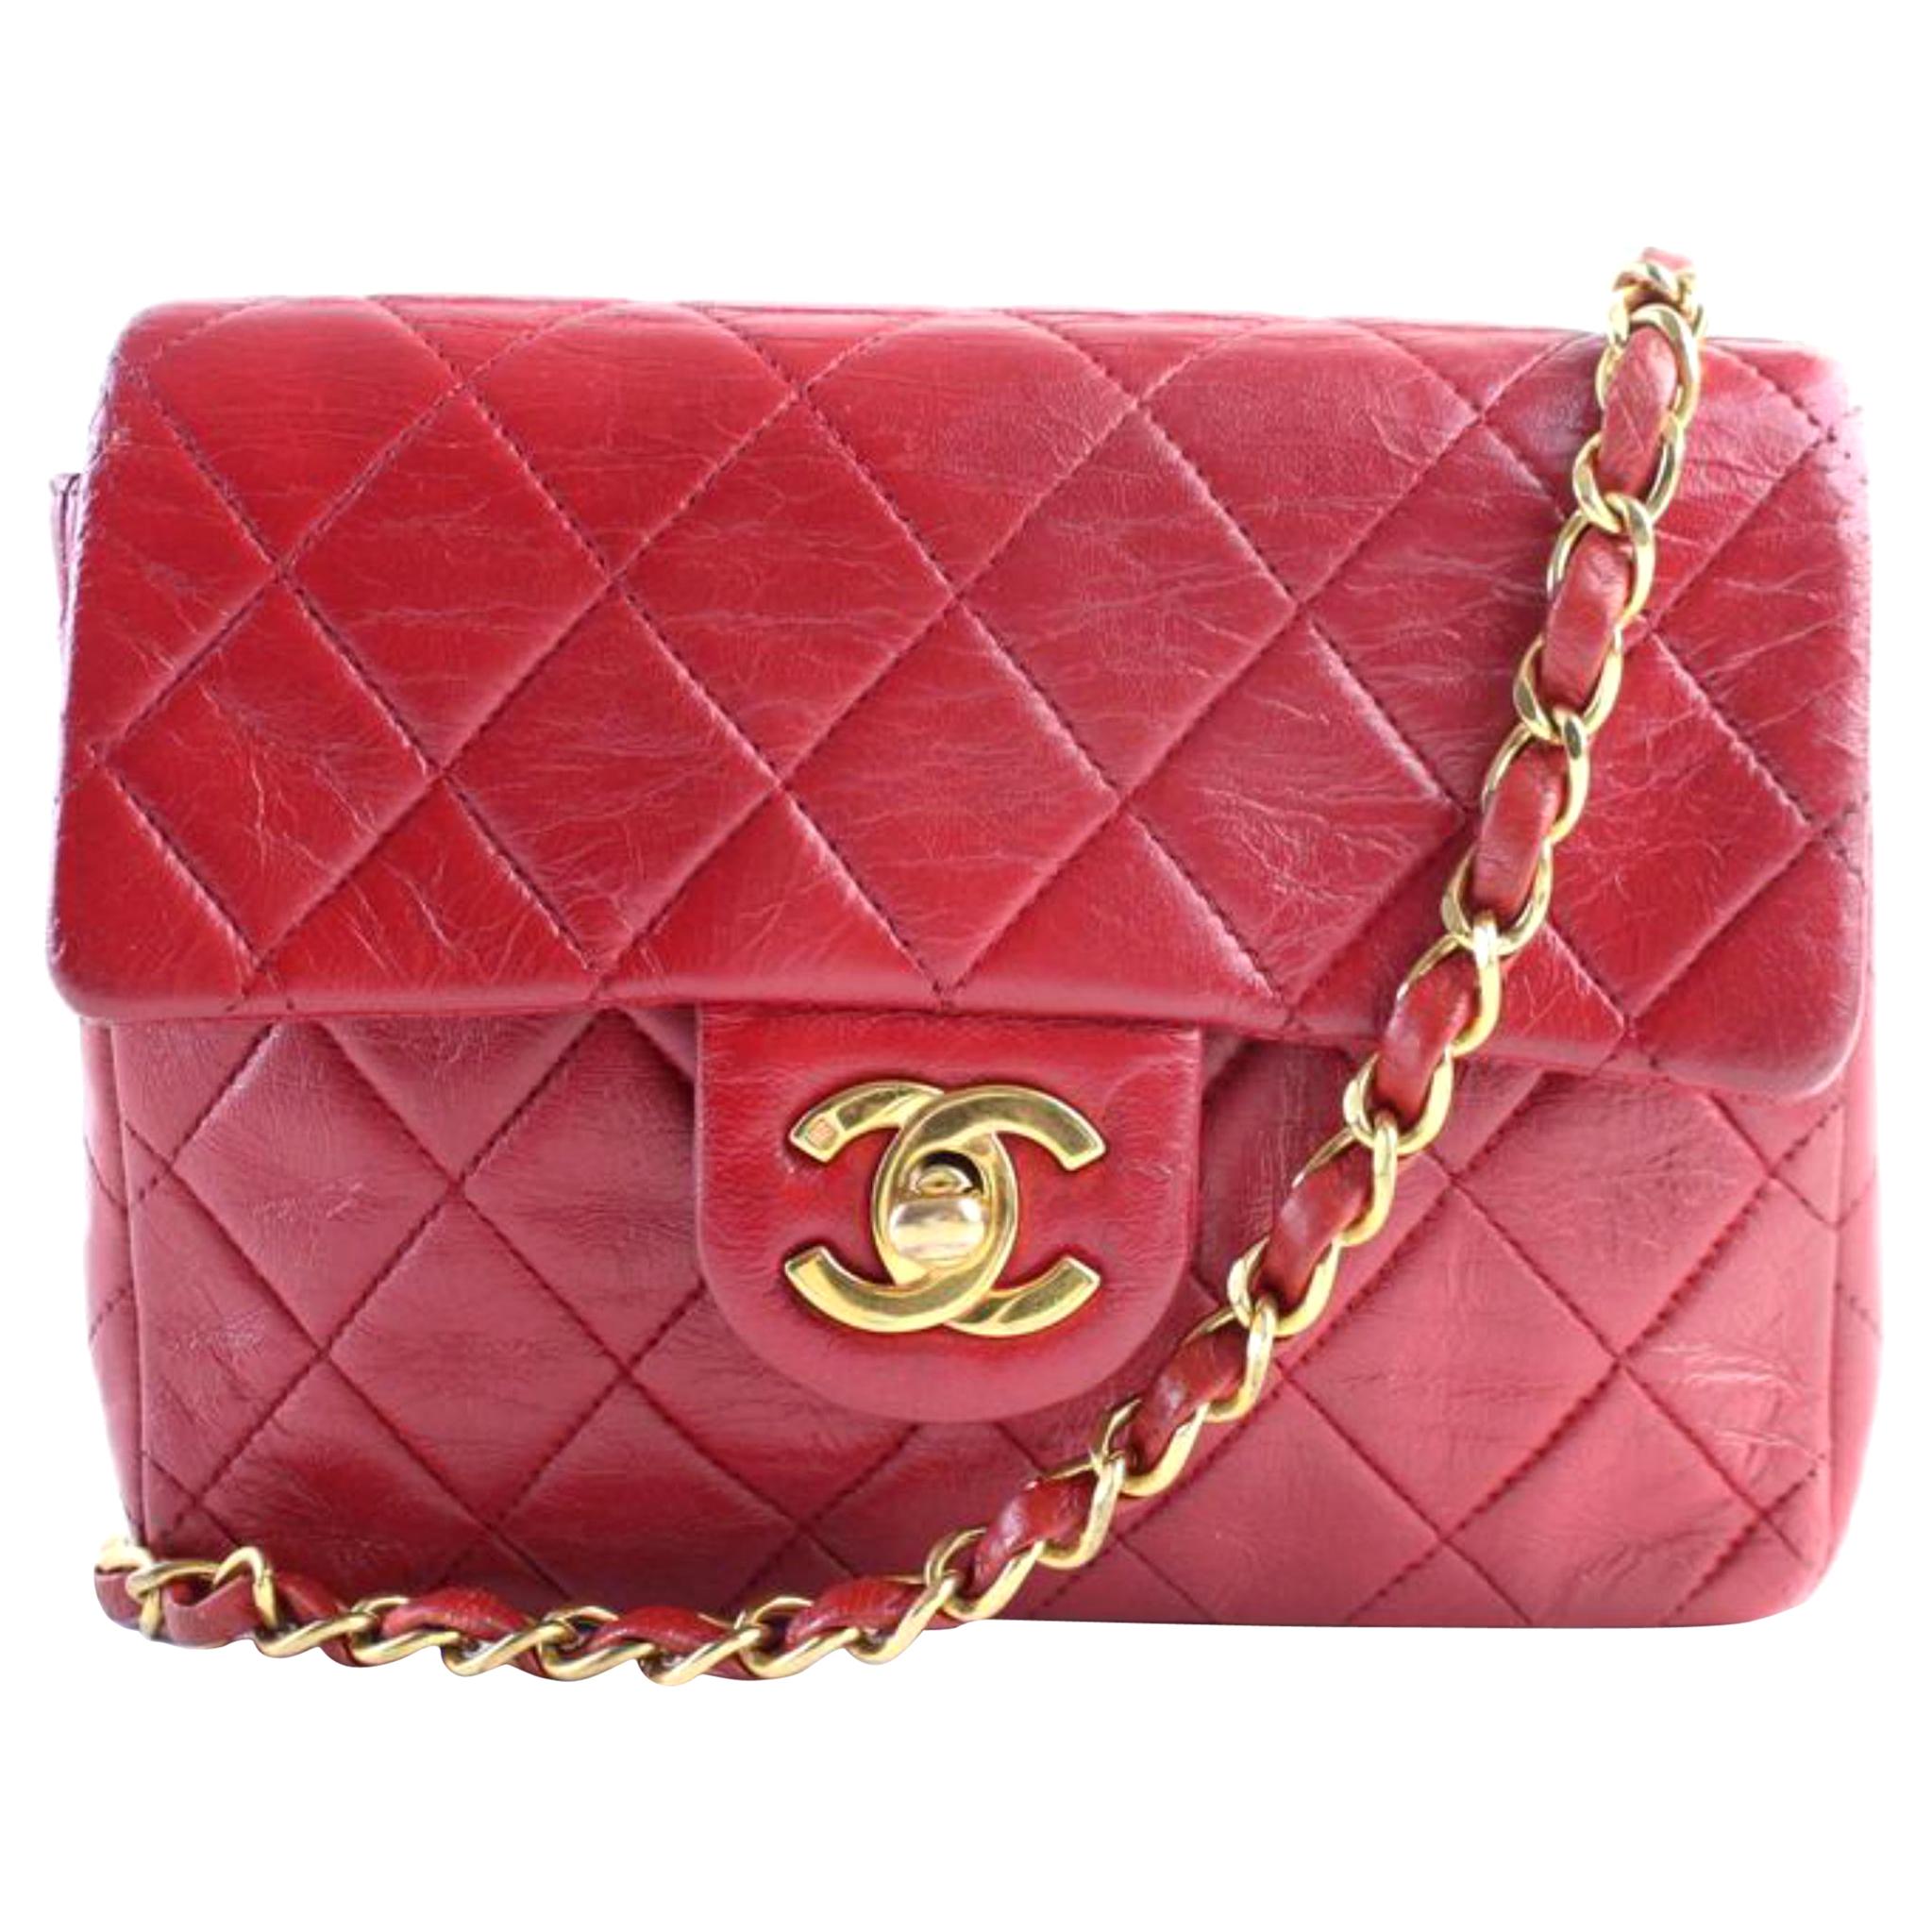 Chanel Classic Flap Mini Square 4cr0703 Red Leather Cross Body Bag For Sale